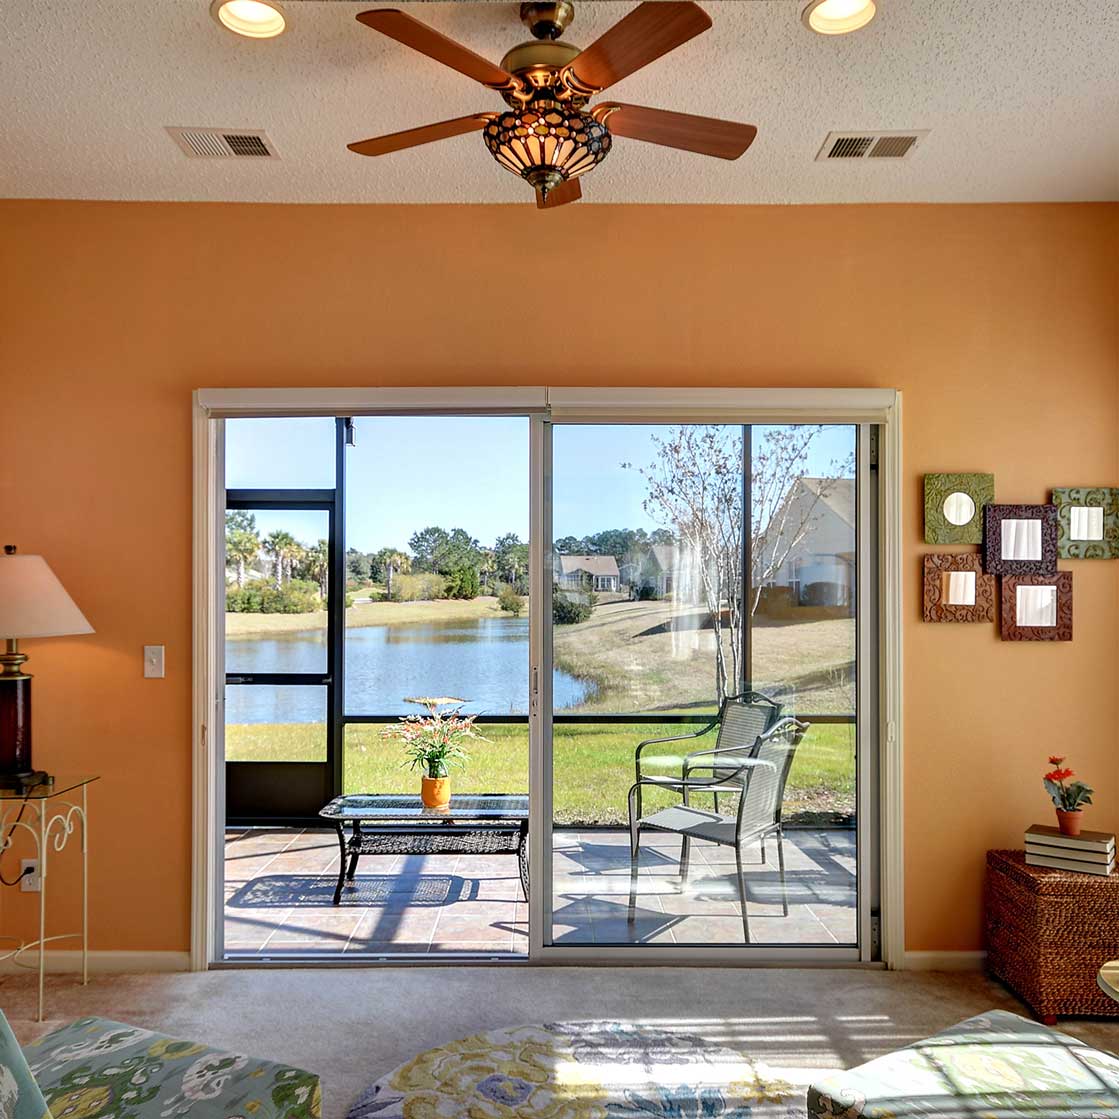 HDR image of a bright orange room with an outdoor patio.